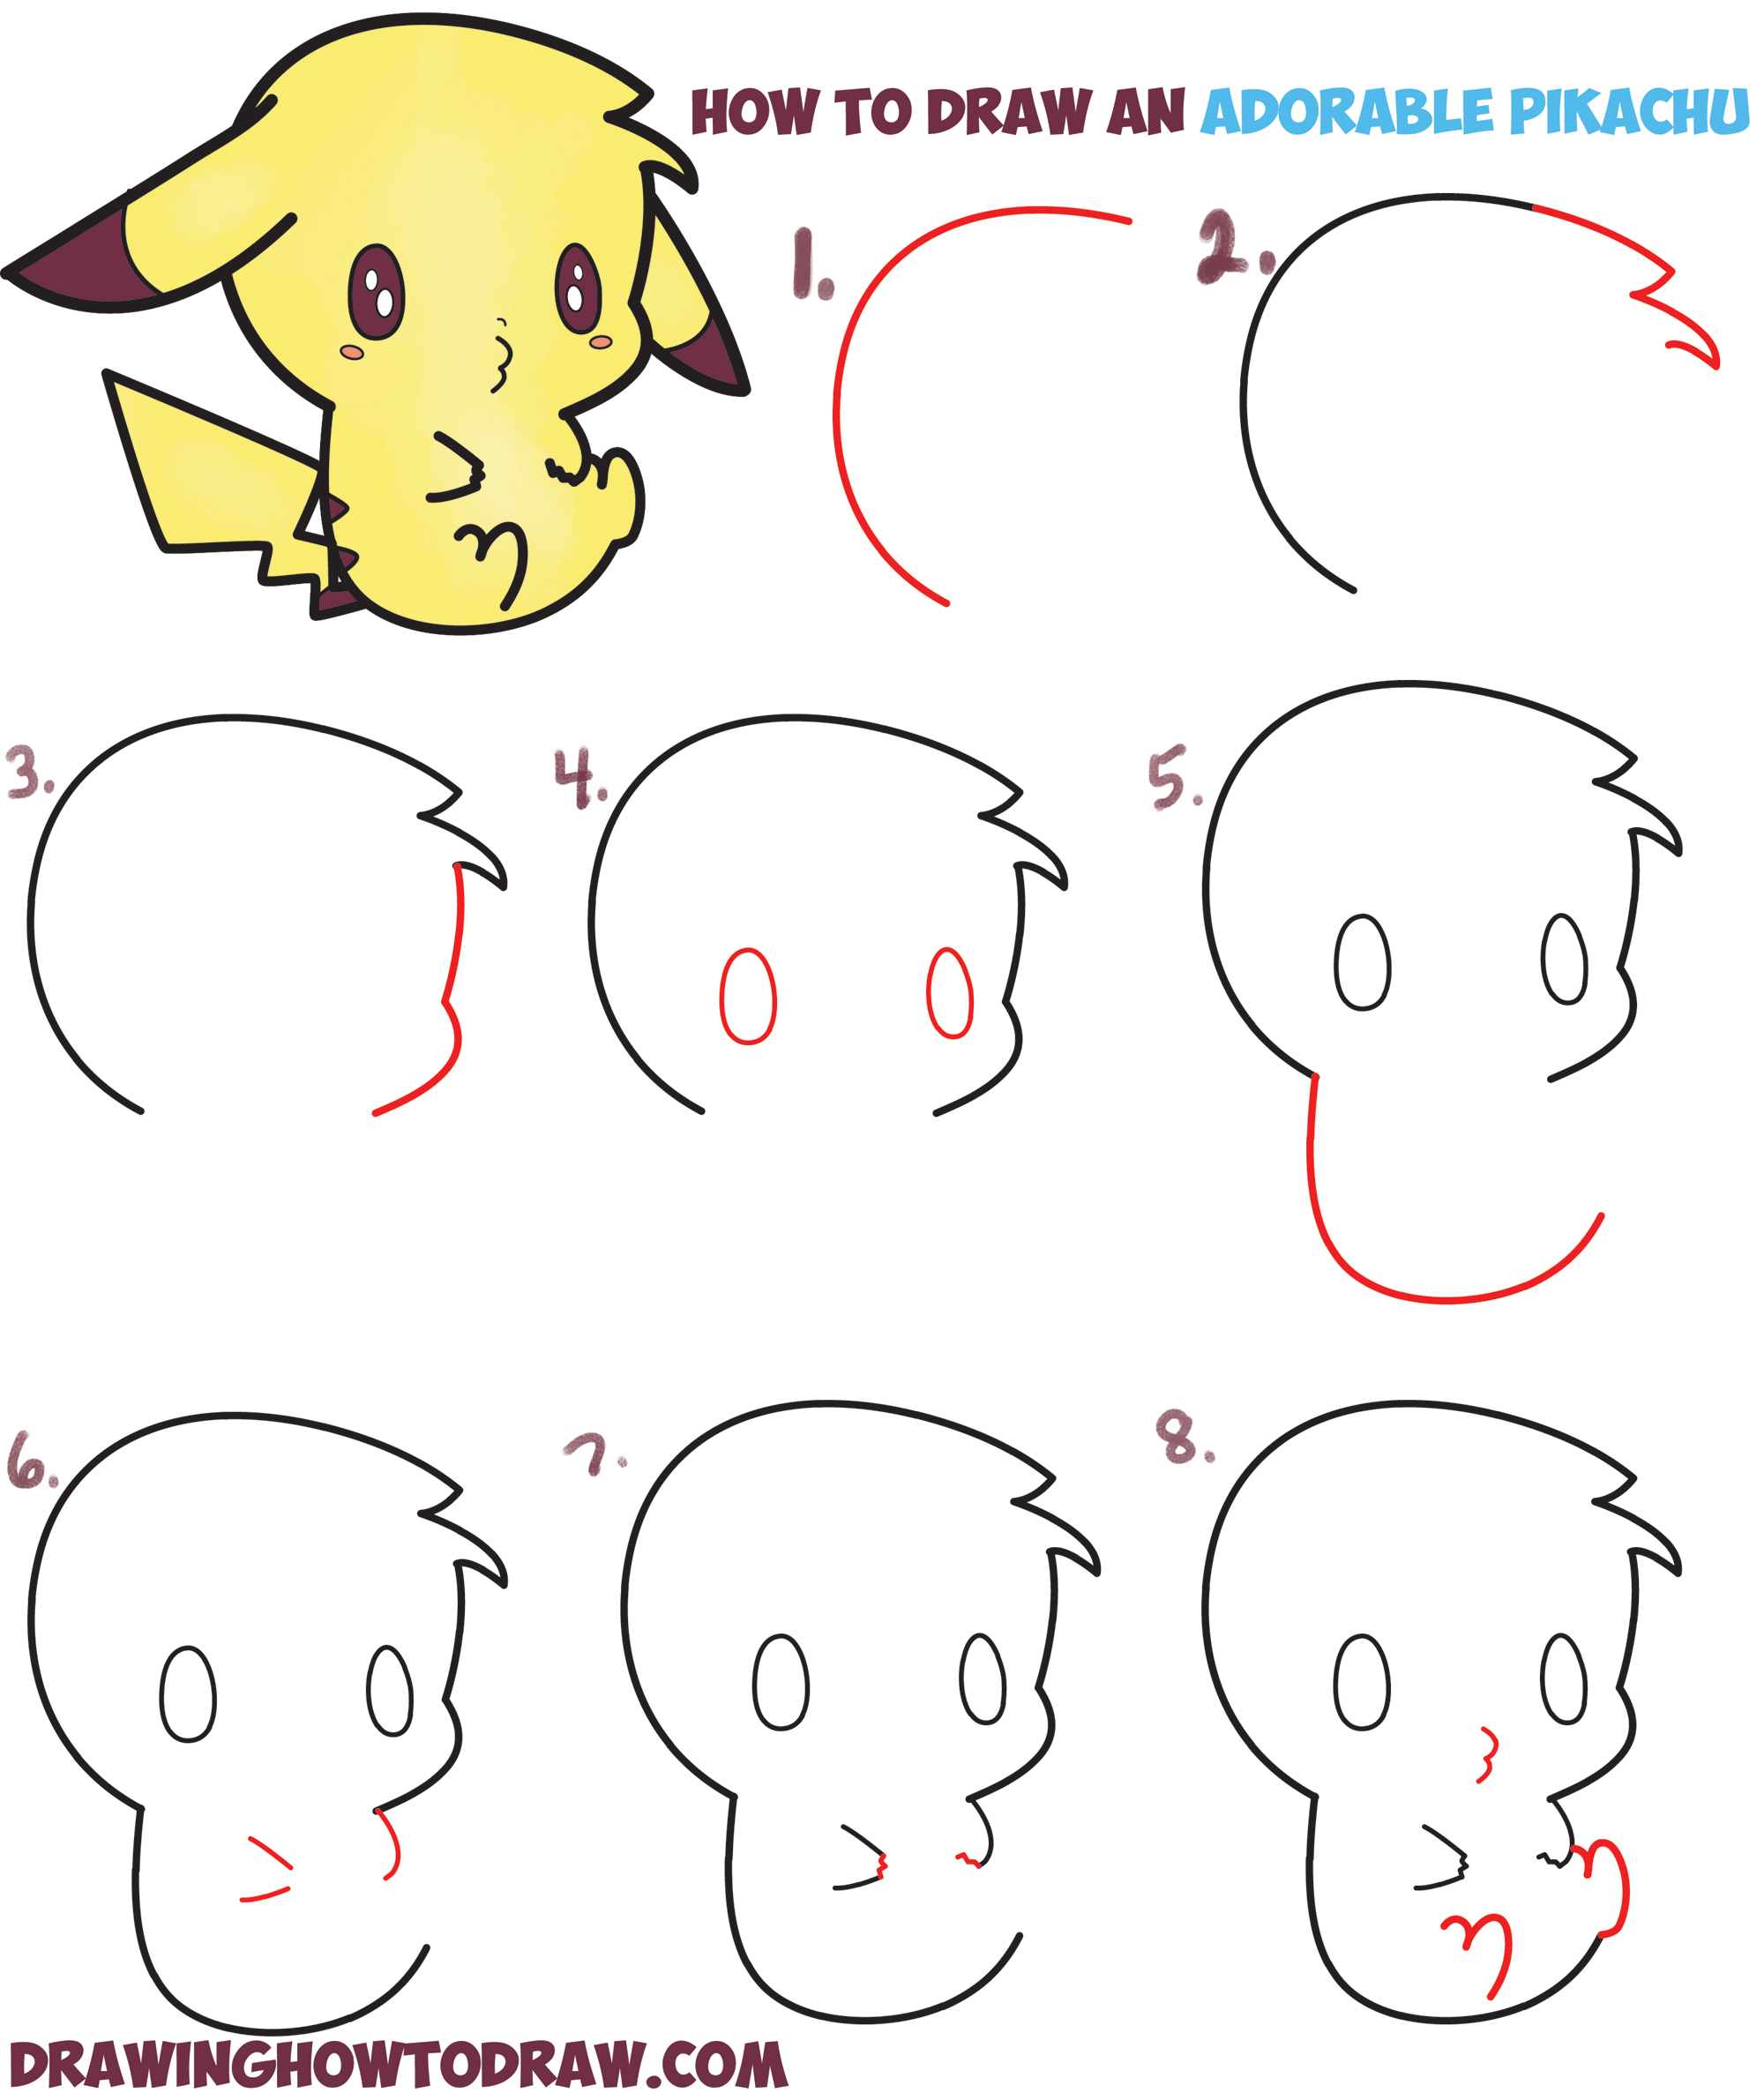 How to Draw Pikachu | Pokemon Easy Drawing Step by Step - YouTube-saigonsouth.com.vn